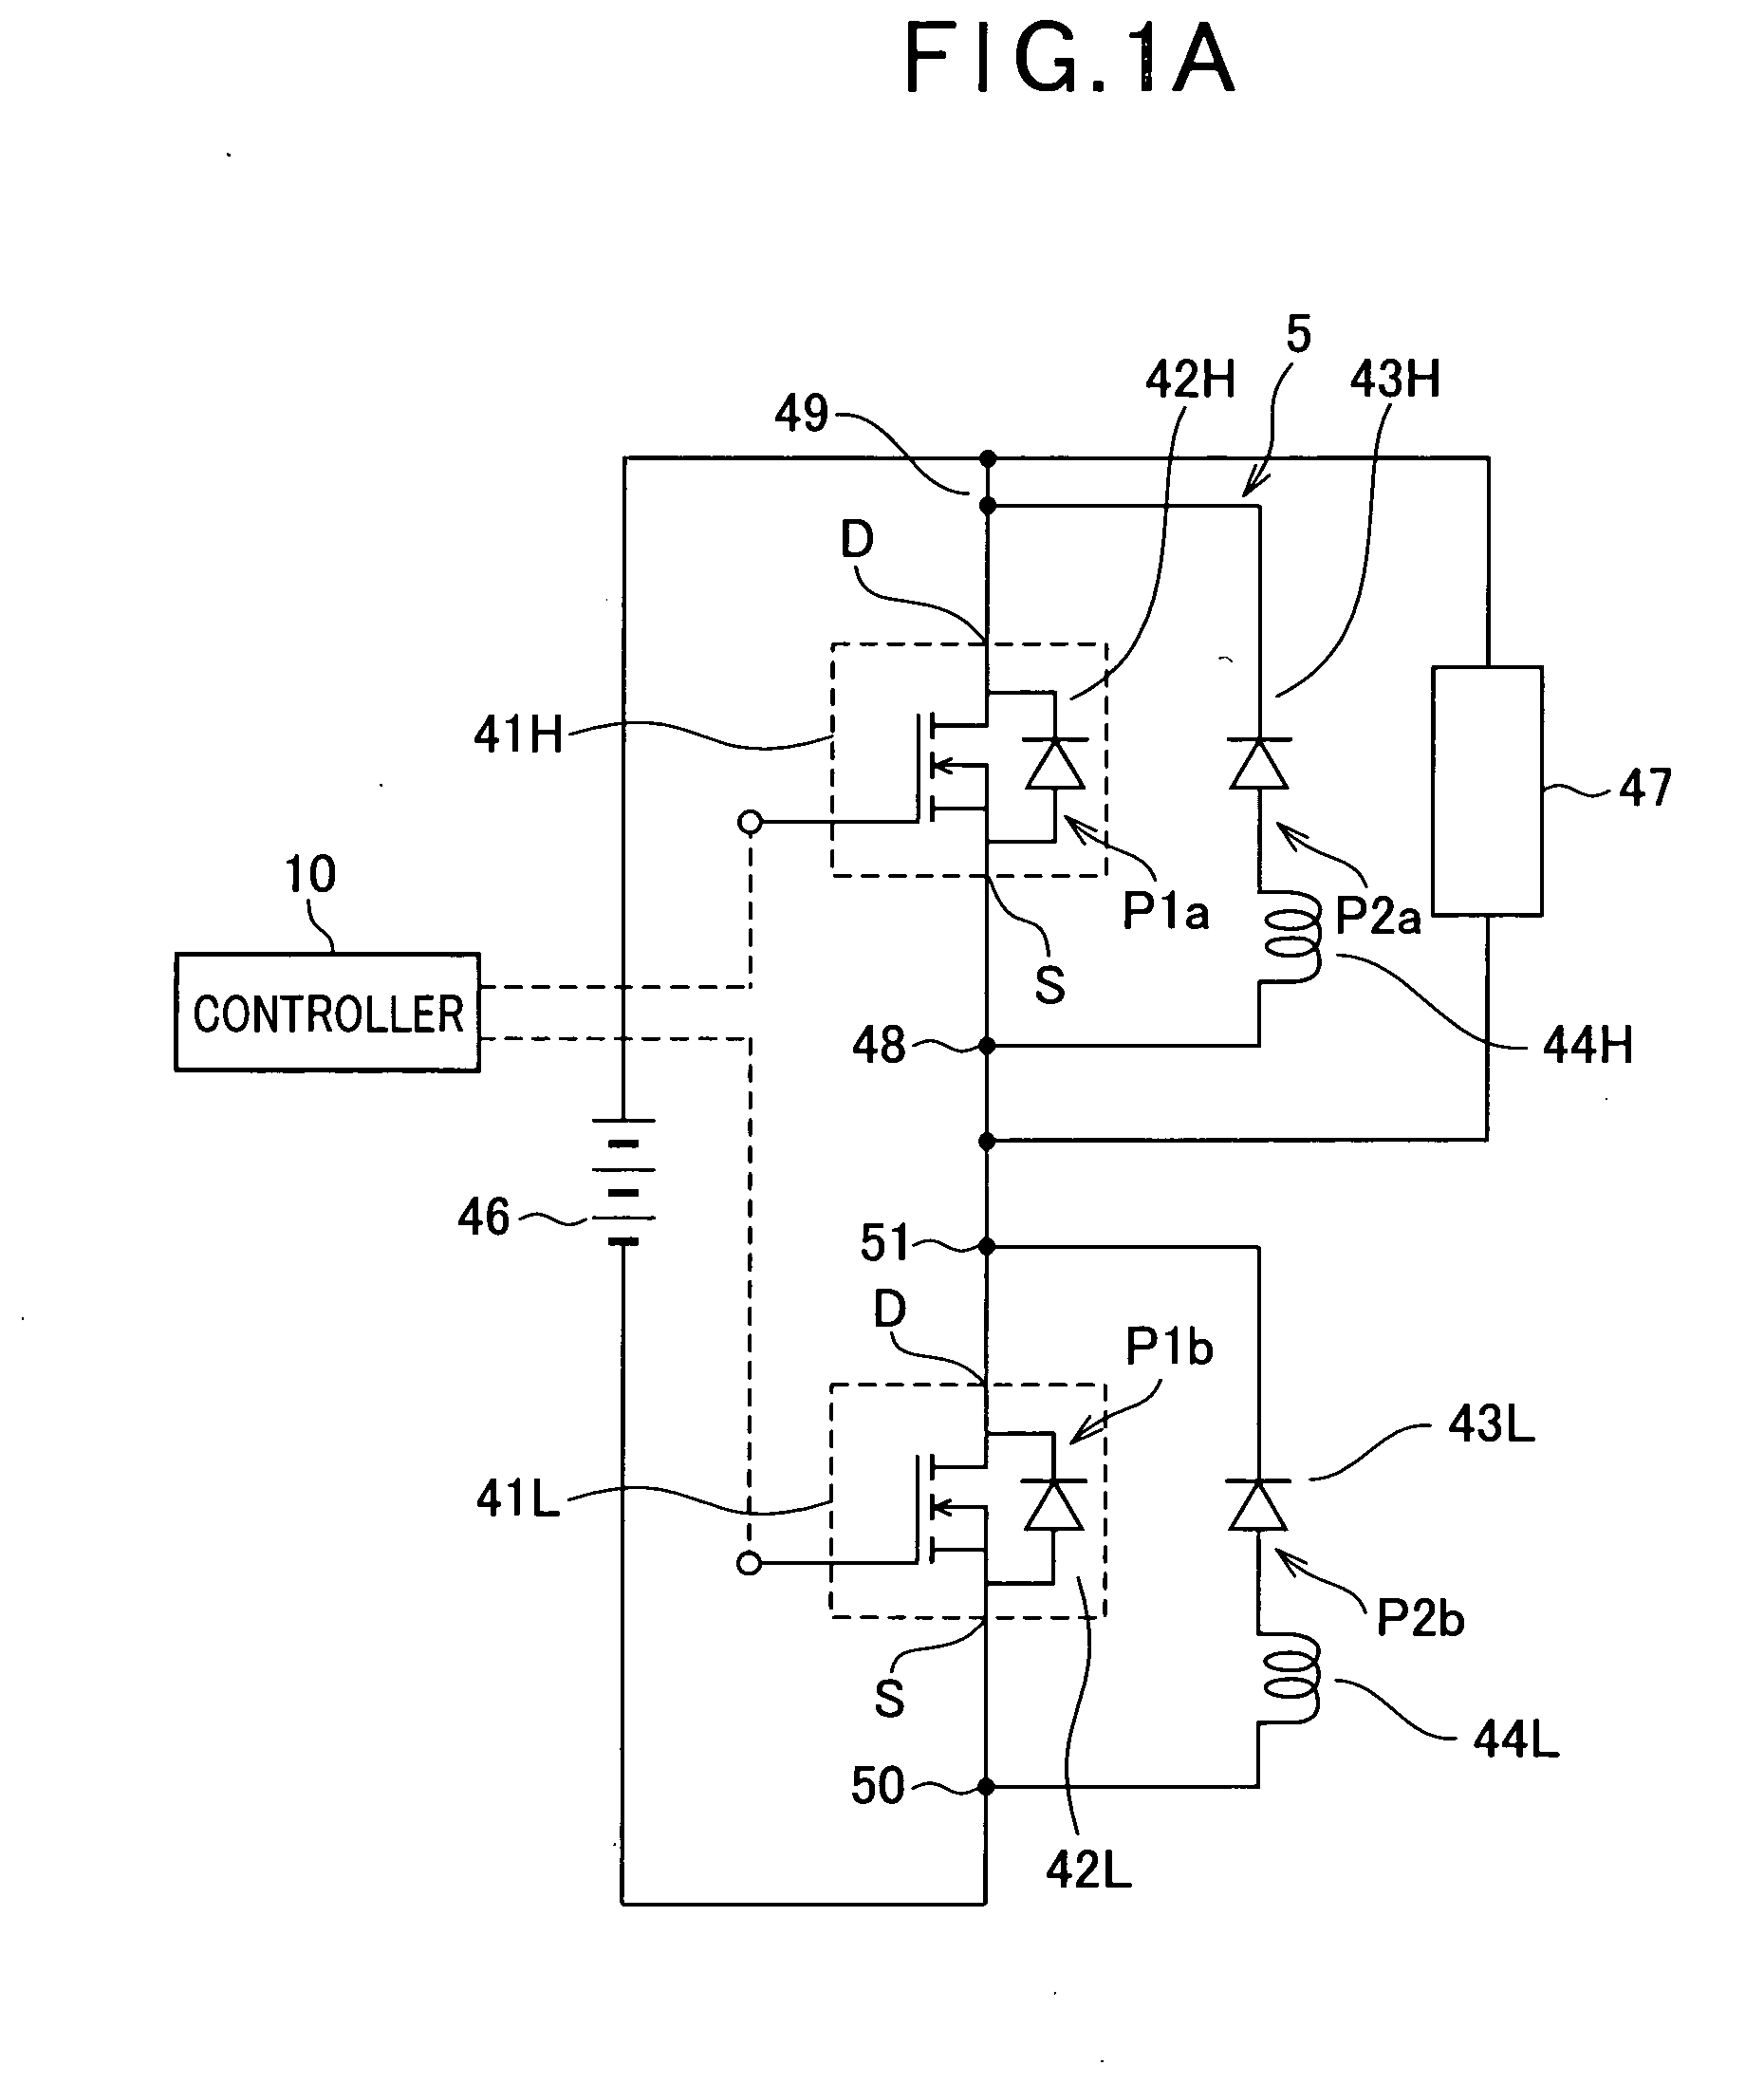 Power switching circuit improved to reduce loss due to reverse recovery current